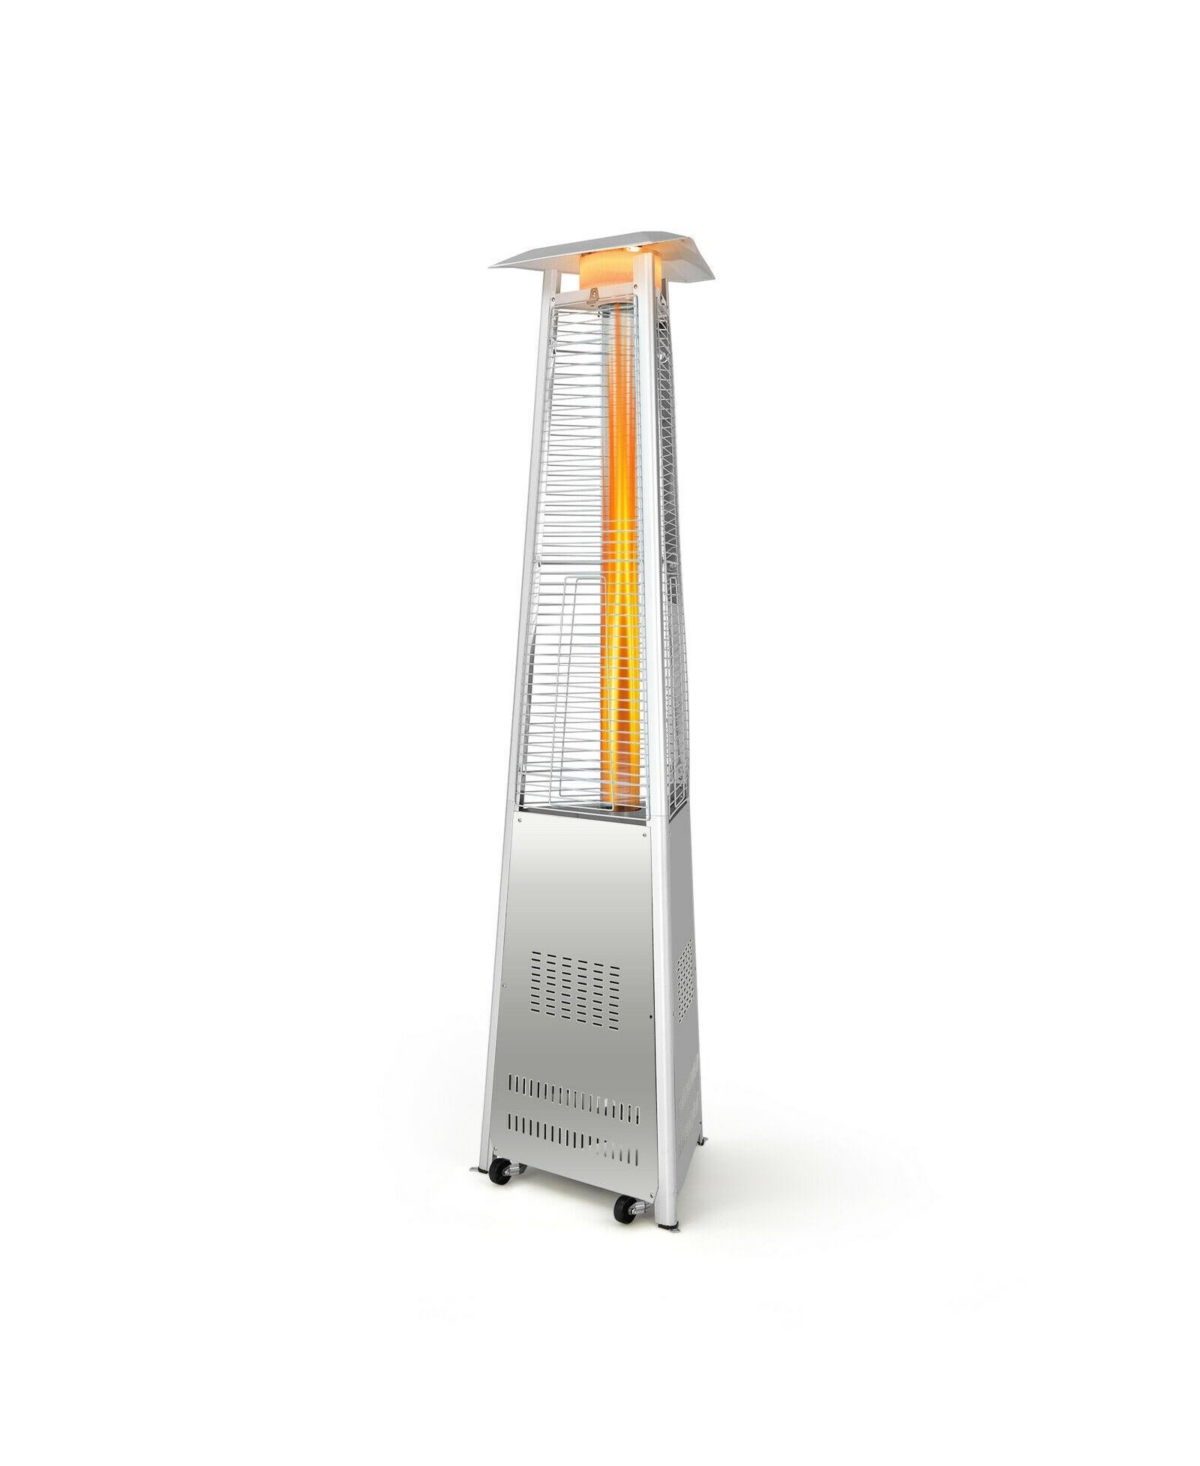 42 000 Btu Stainless Steel Pyramid Patio Heater With Wheels - Silver